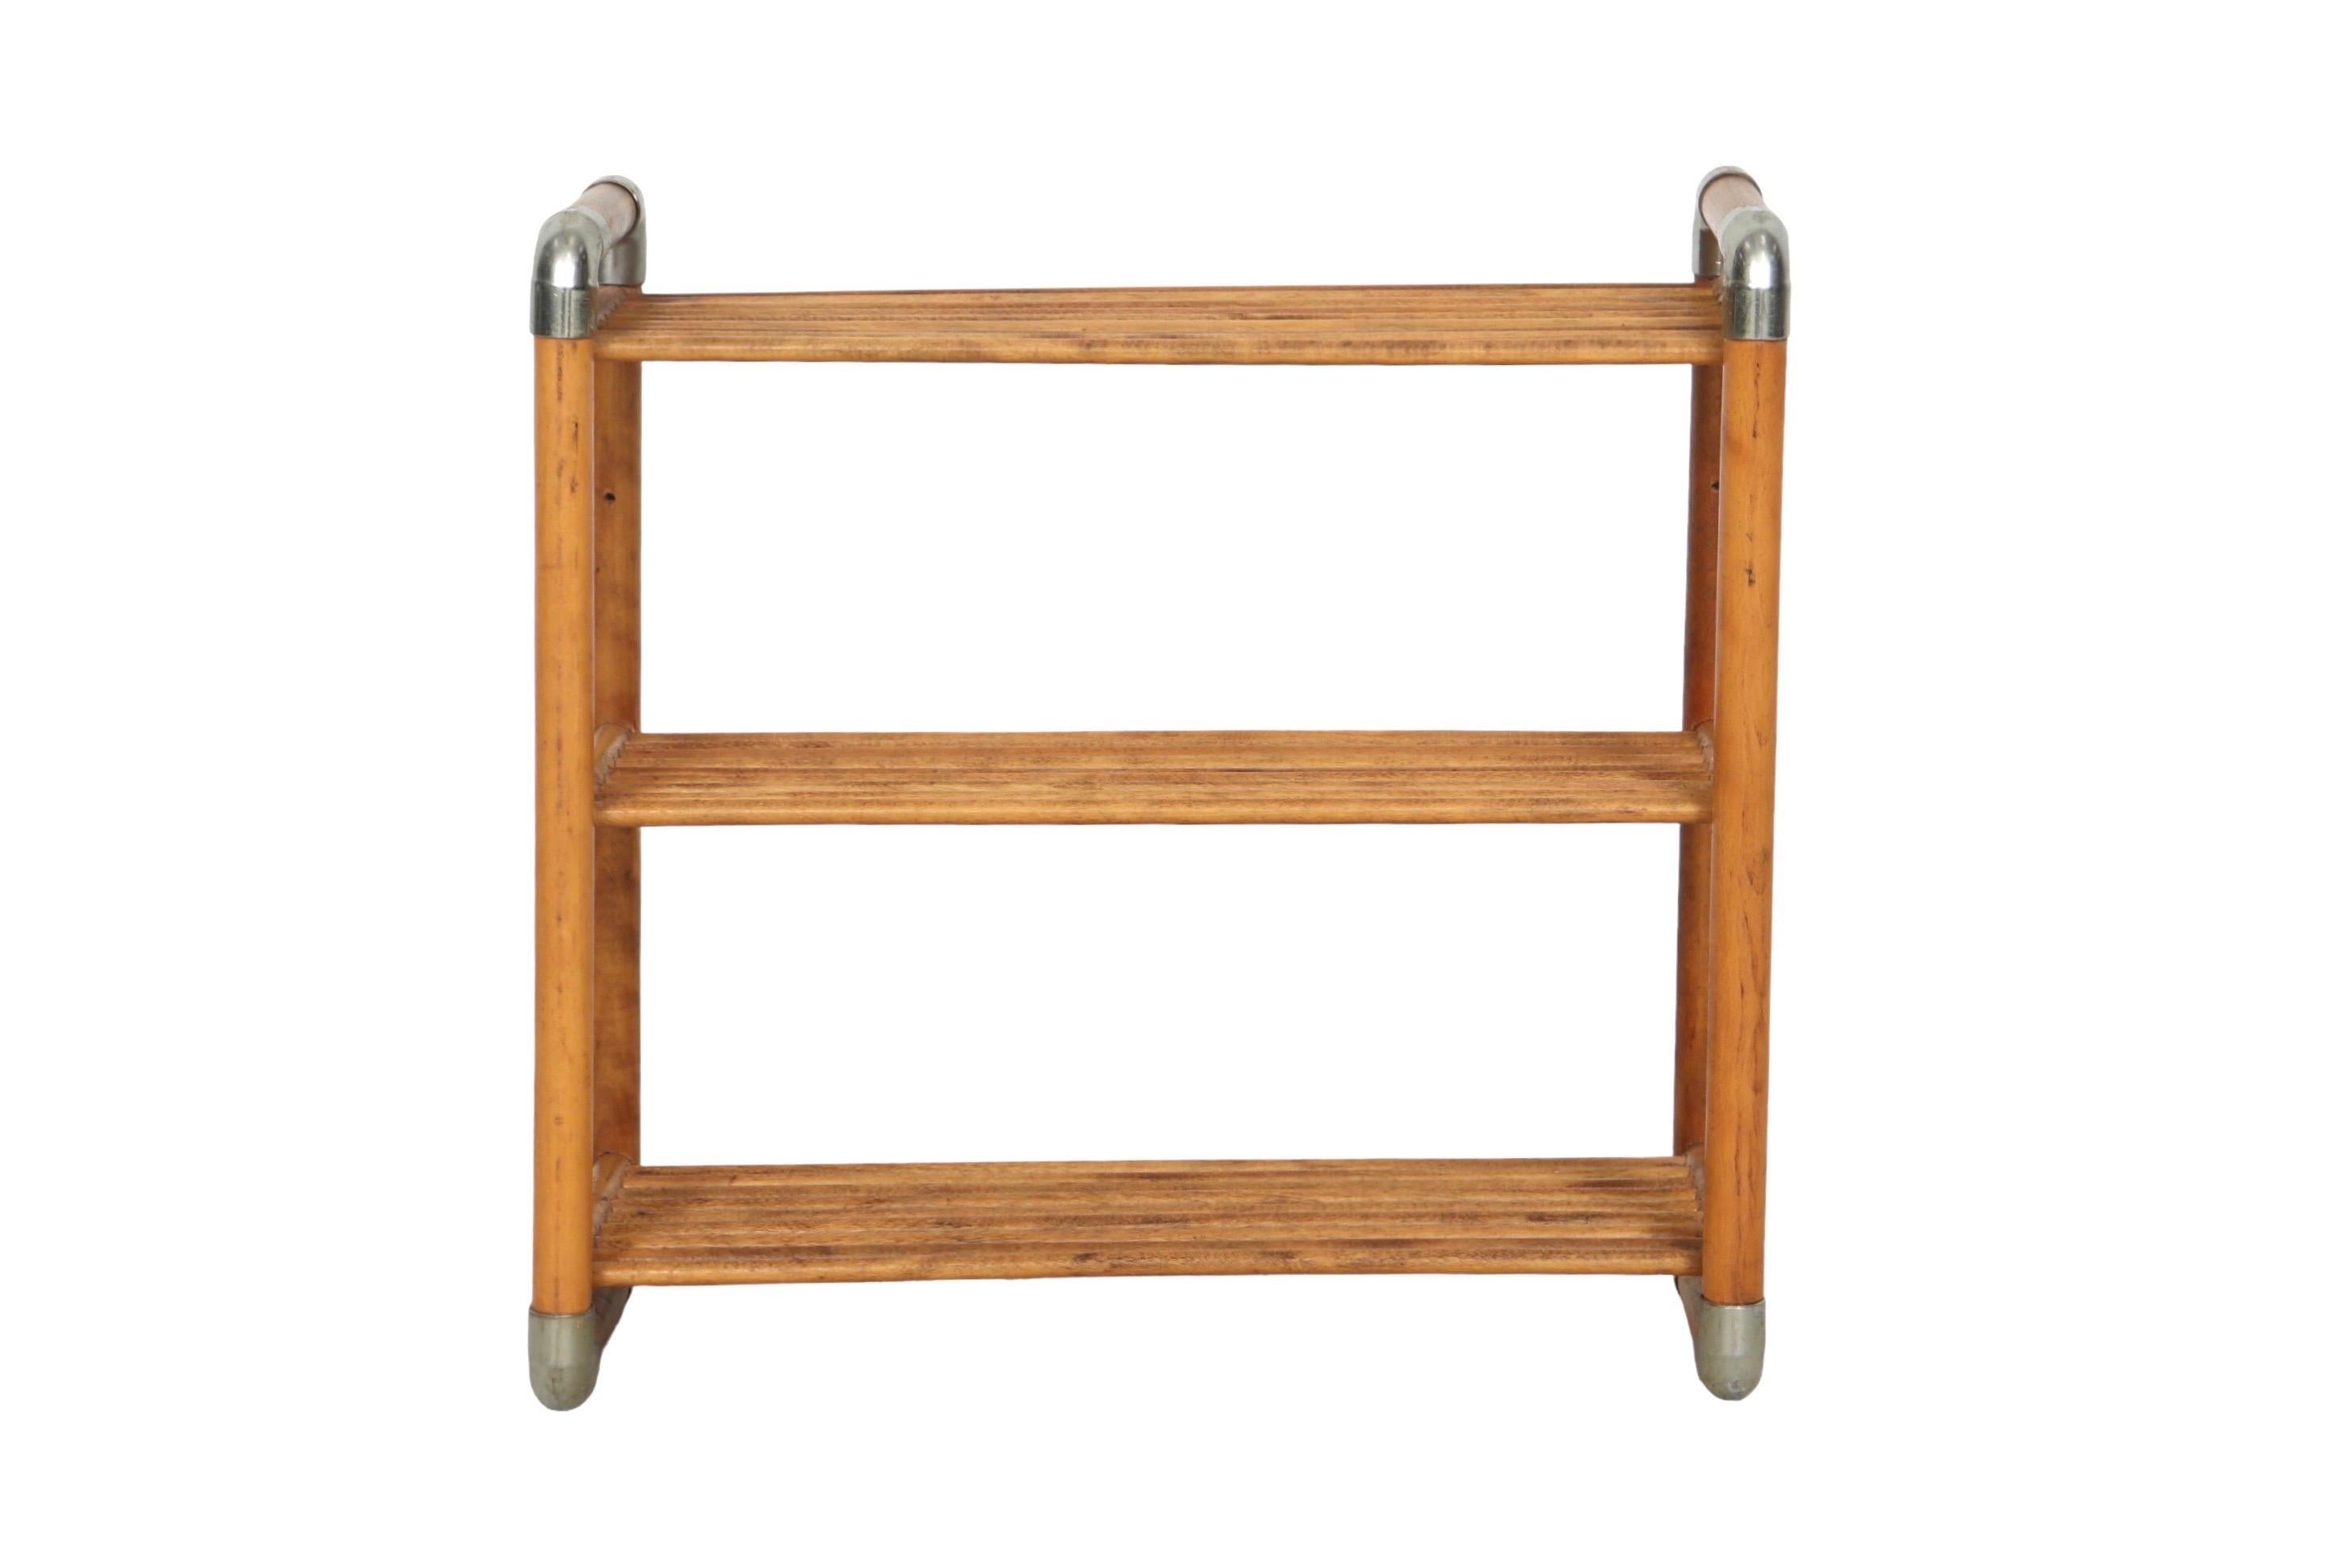 A mid-century free-standing set of shelves. Made of walnut with chrome corners. Three shelves are made with wooden slats. Could also be attached to a wall.
